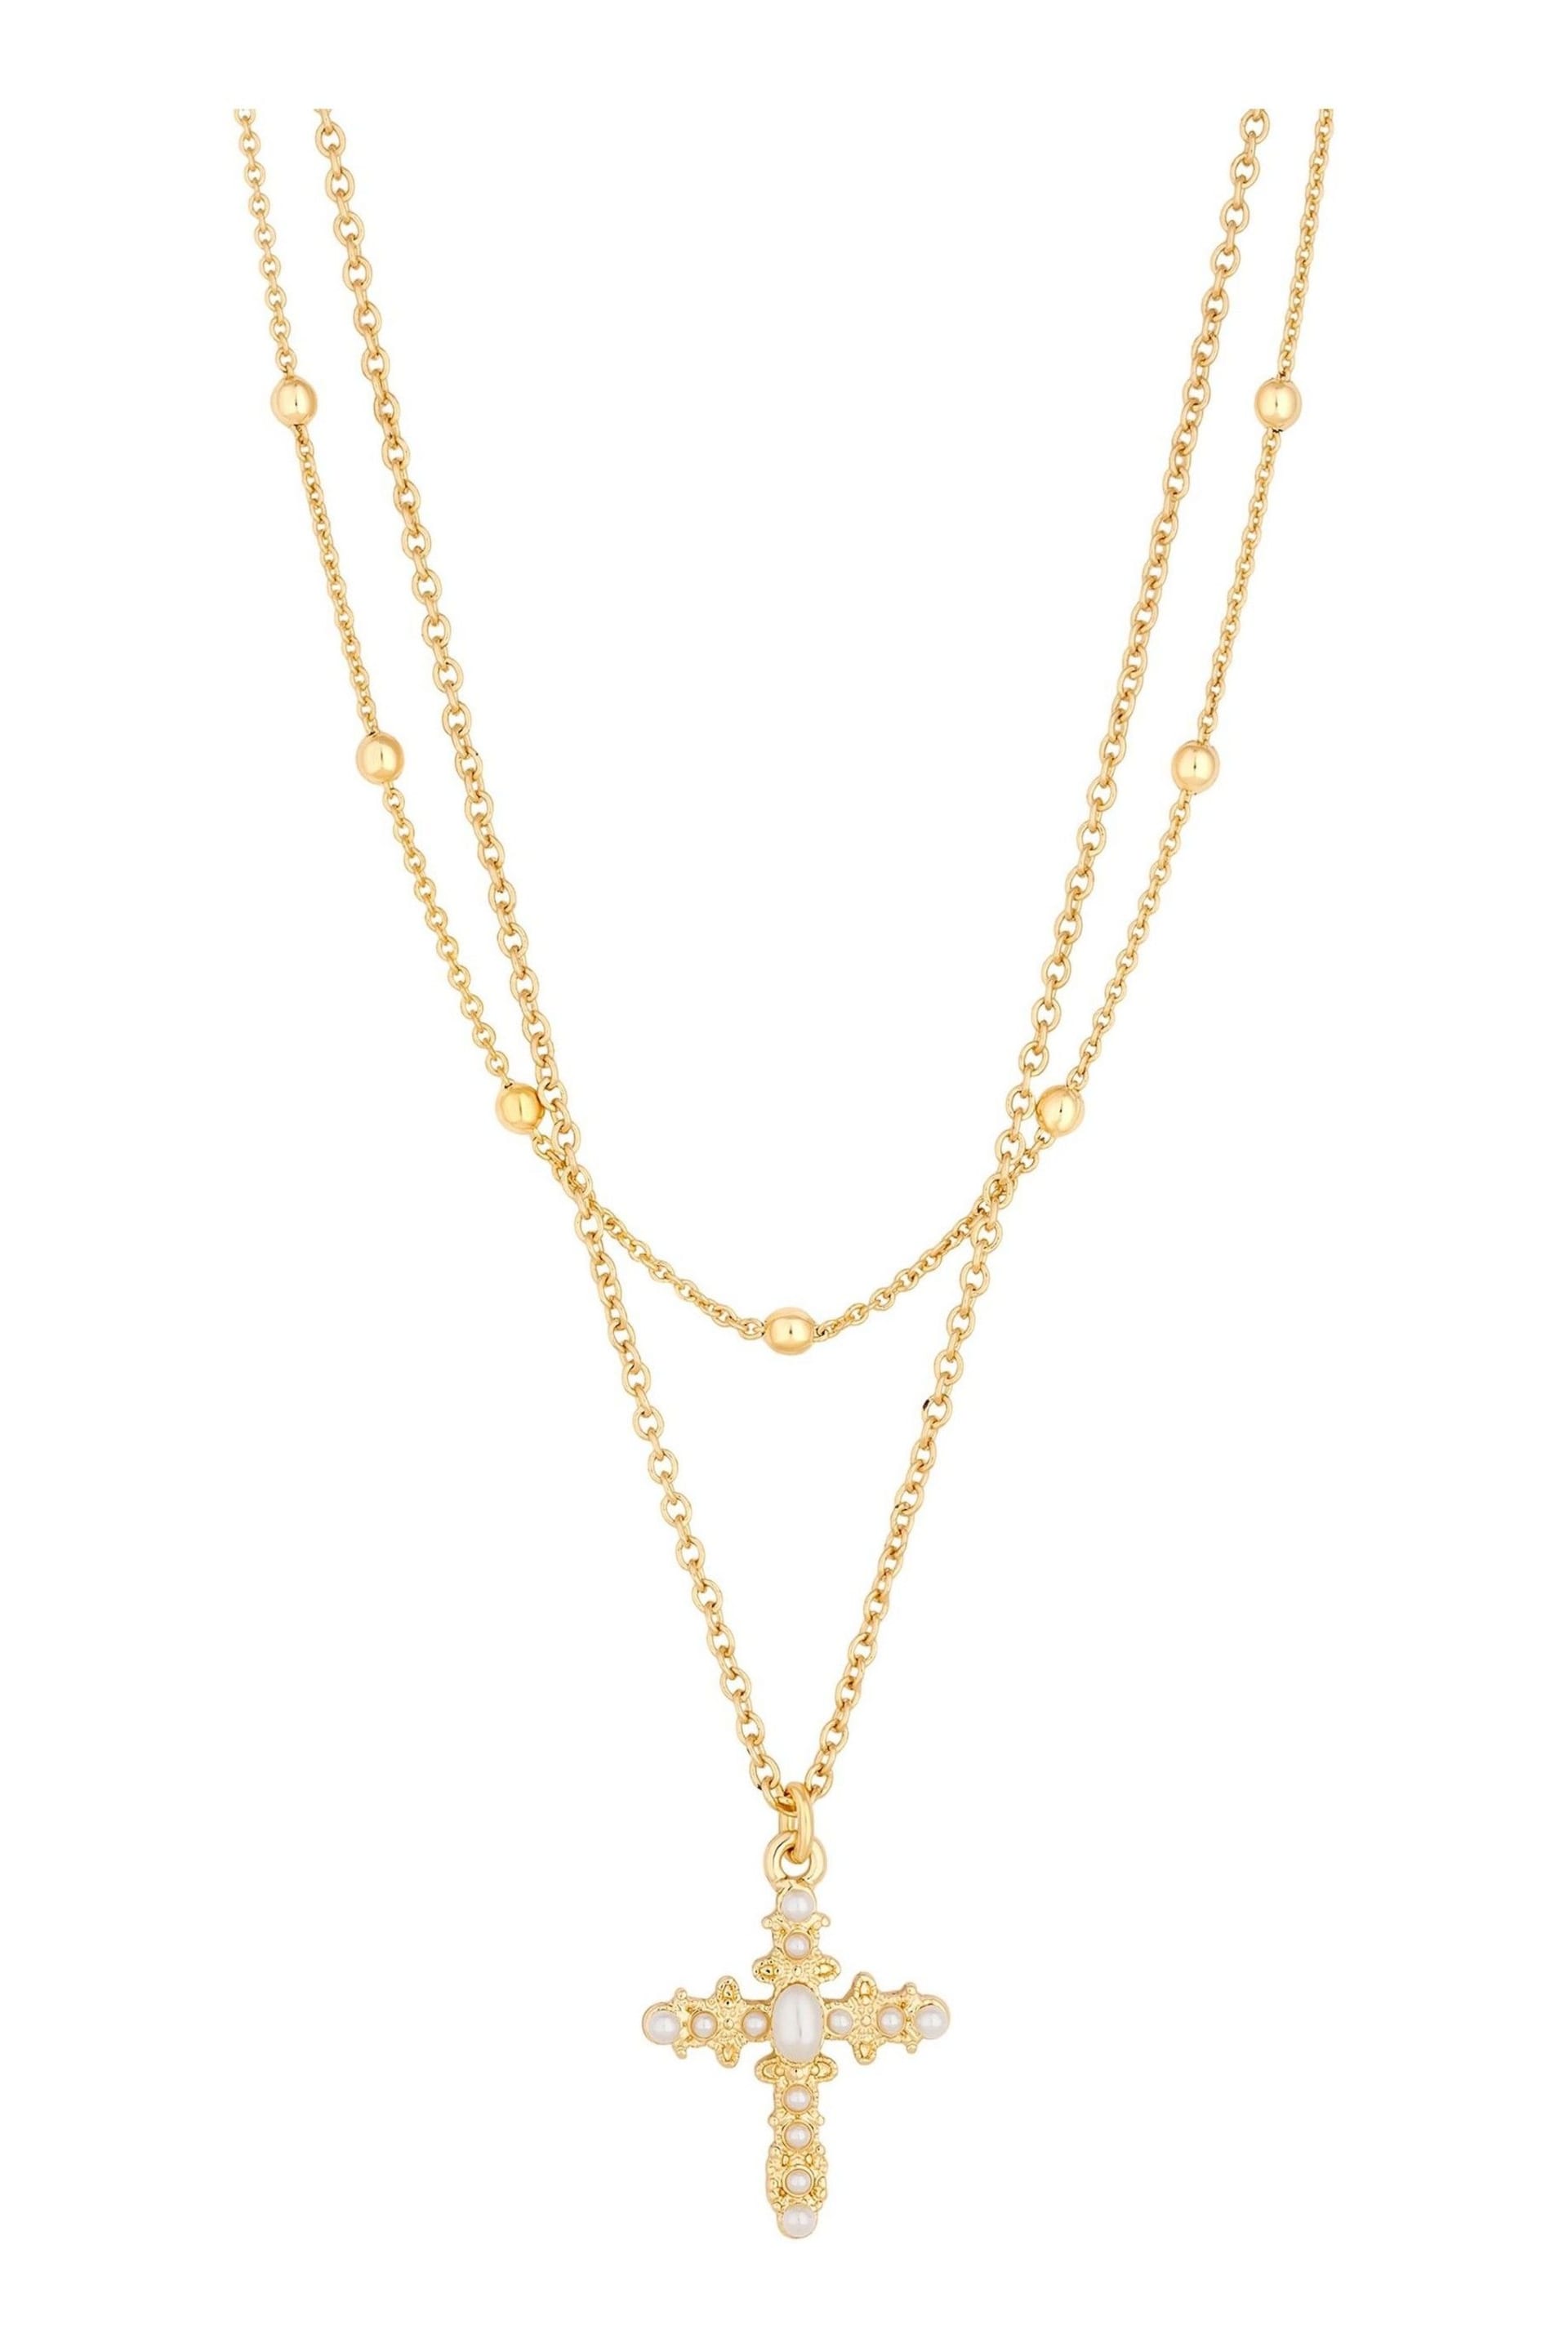 Lipsy Jewellery Gold Tone Layered Cross Pendant Necklace - Gift Boxed - Image 1 of 2